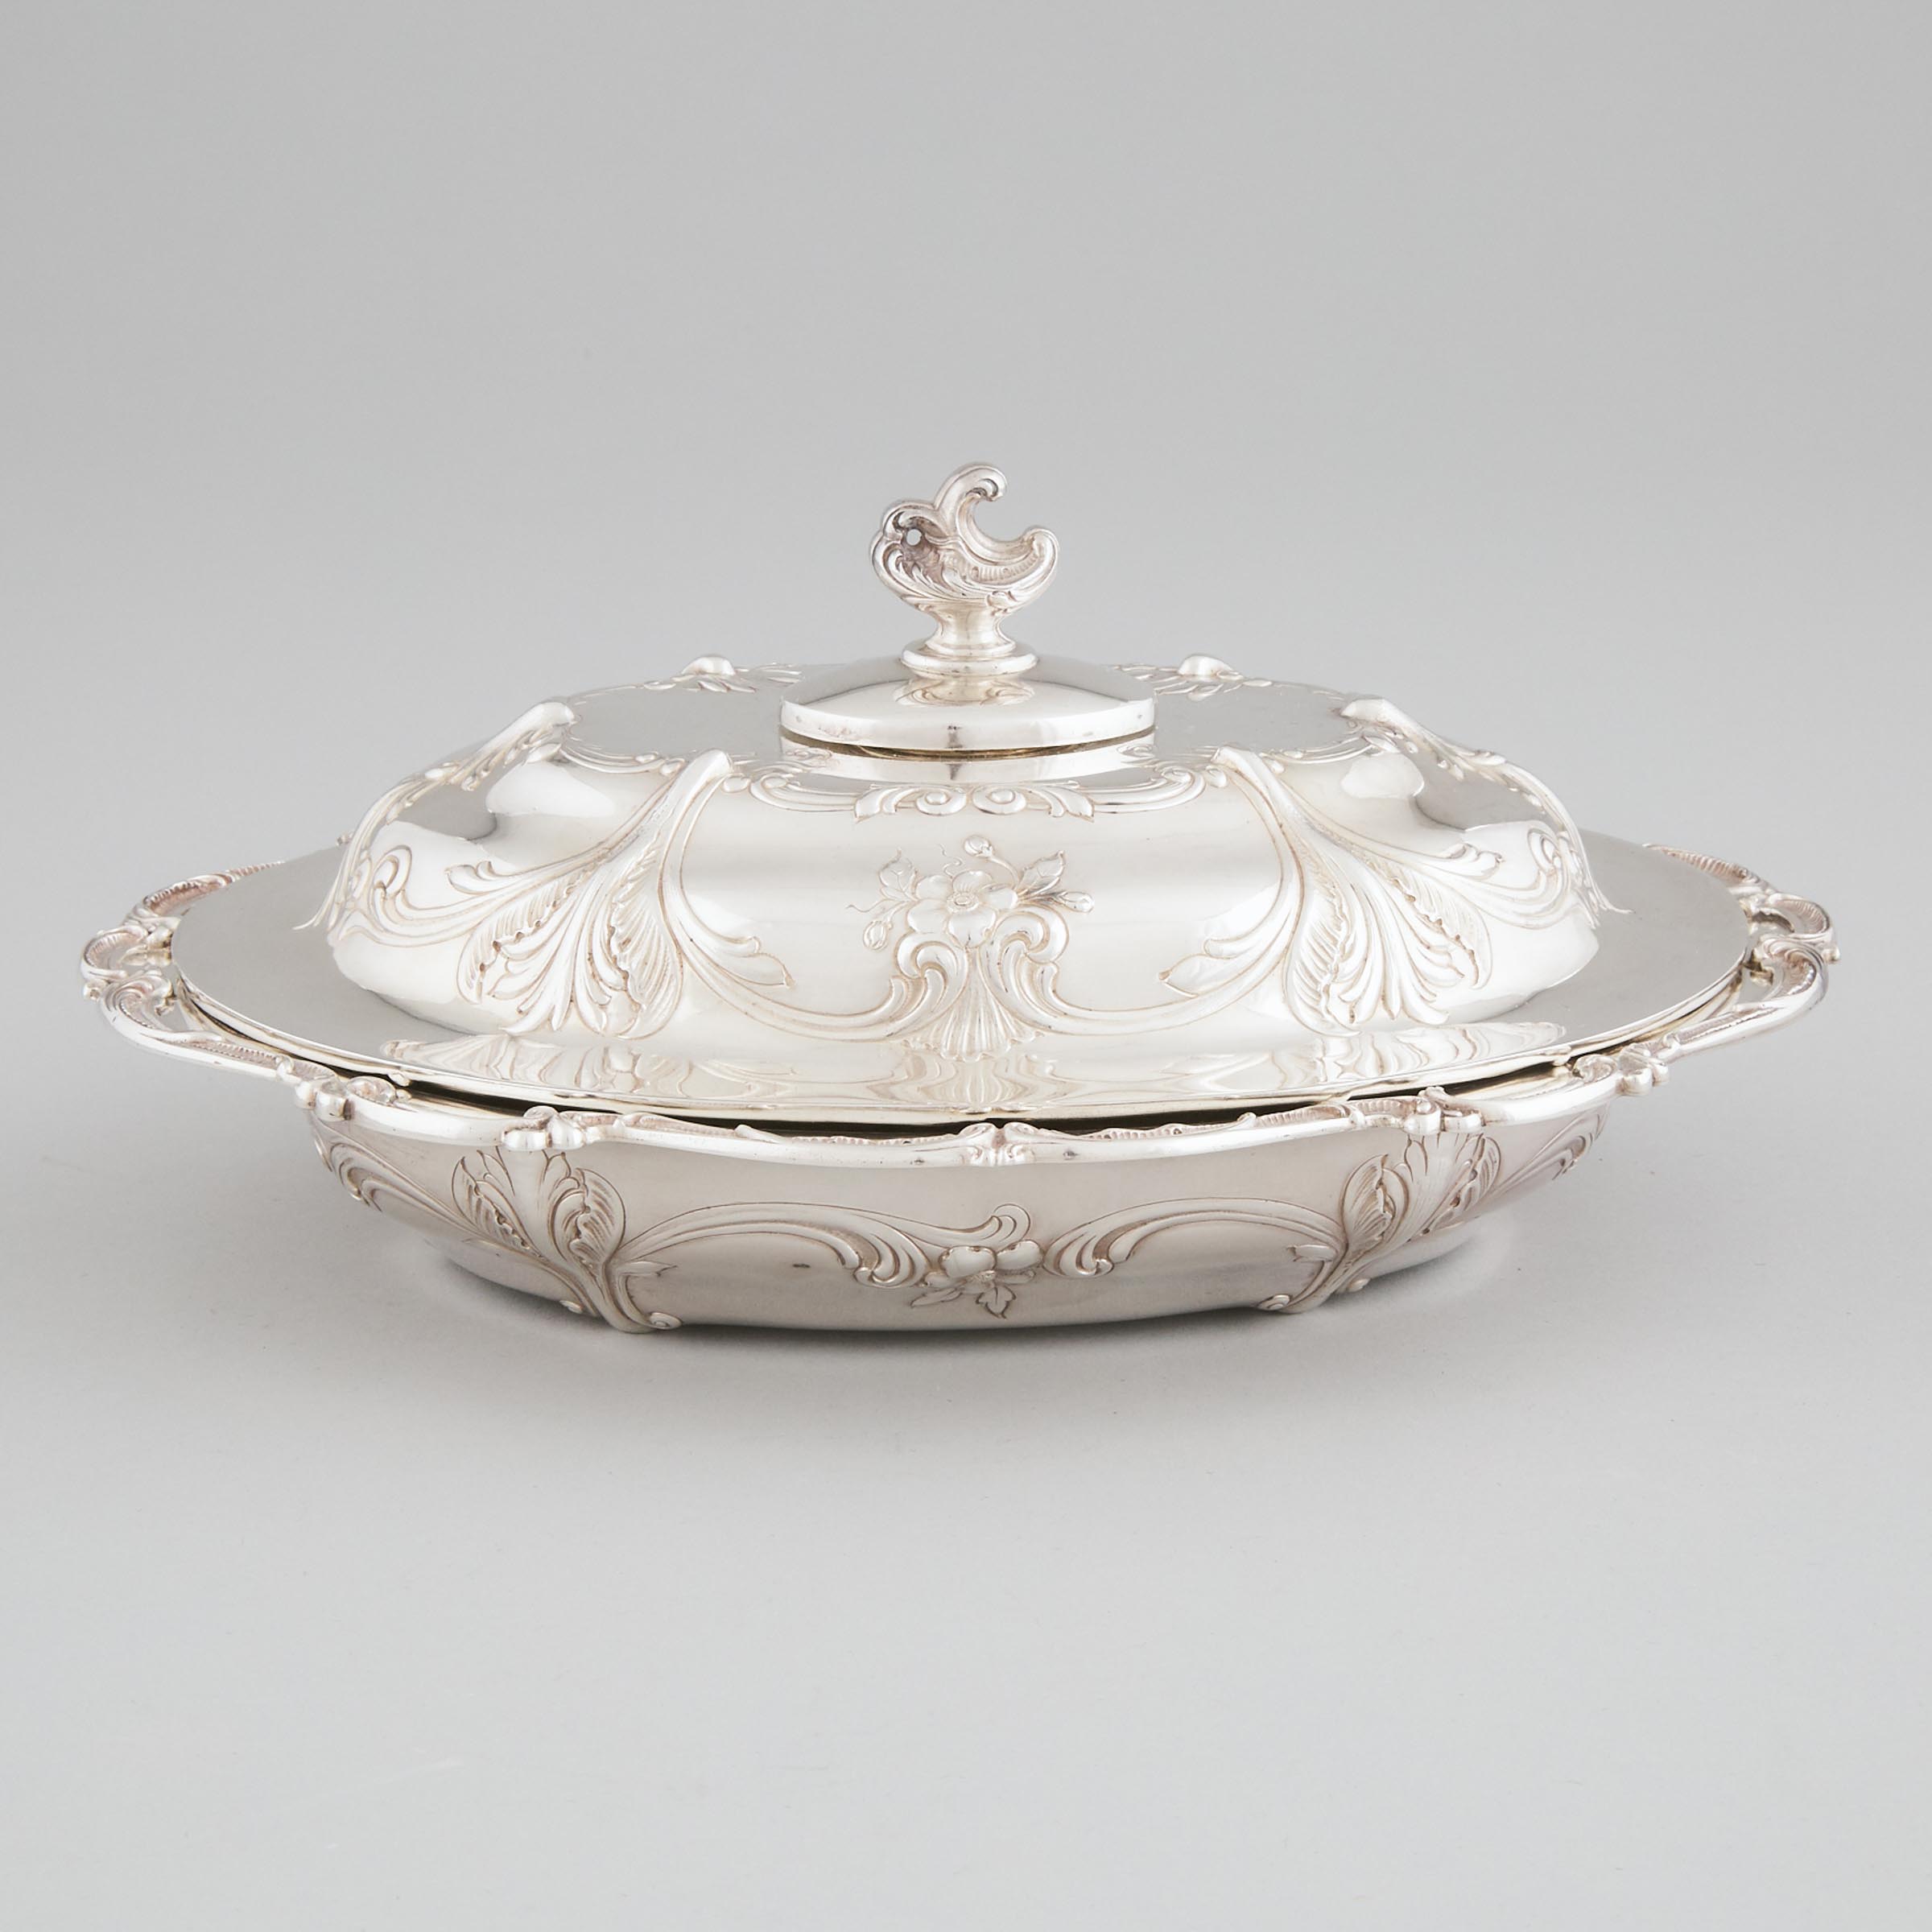 American Silver Oval Entrée Dish and Cover, Gorham Mfg. Co., Providence, R.I., 1907